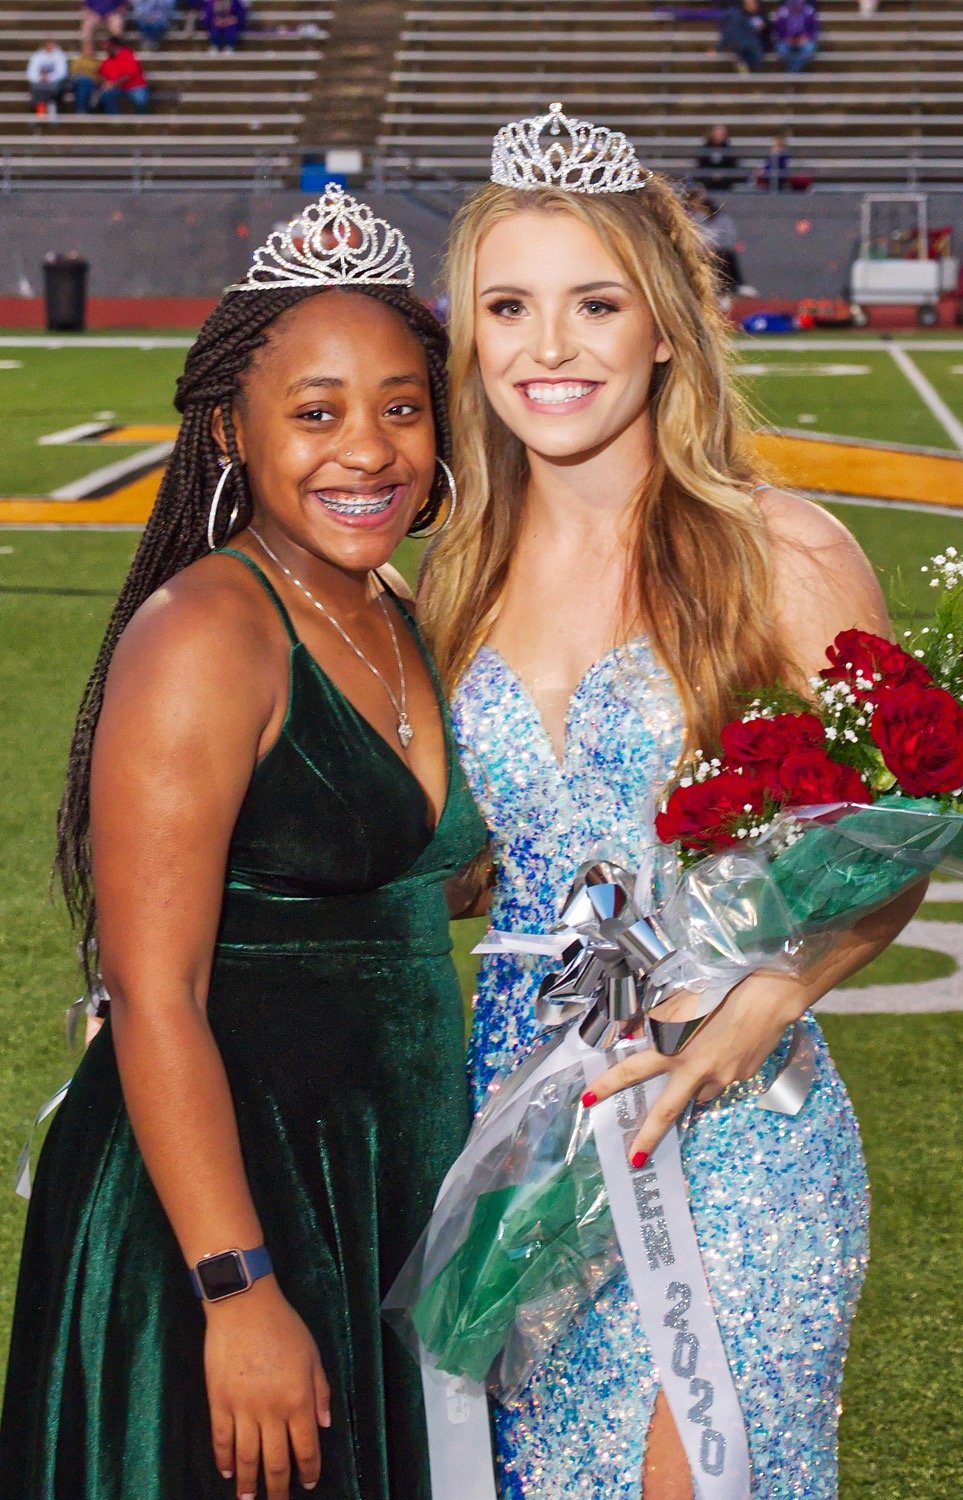 Mineola's 2019 homecoming queen Lovely Wright, at left, with newly-crowned 2020 winner Alyssa Lankford.